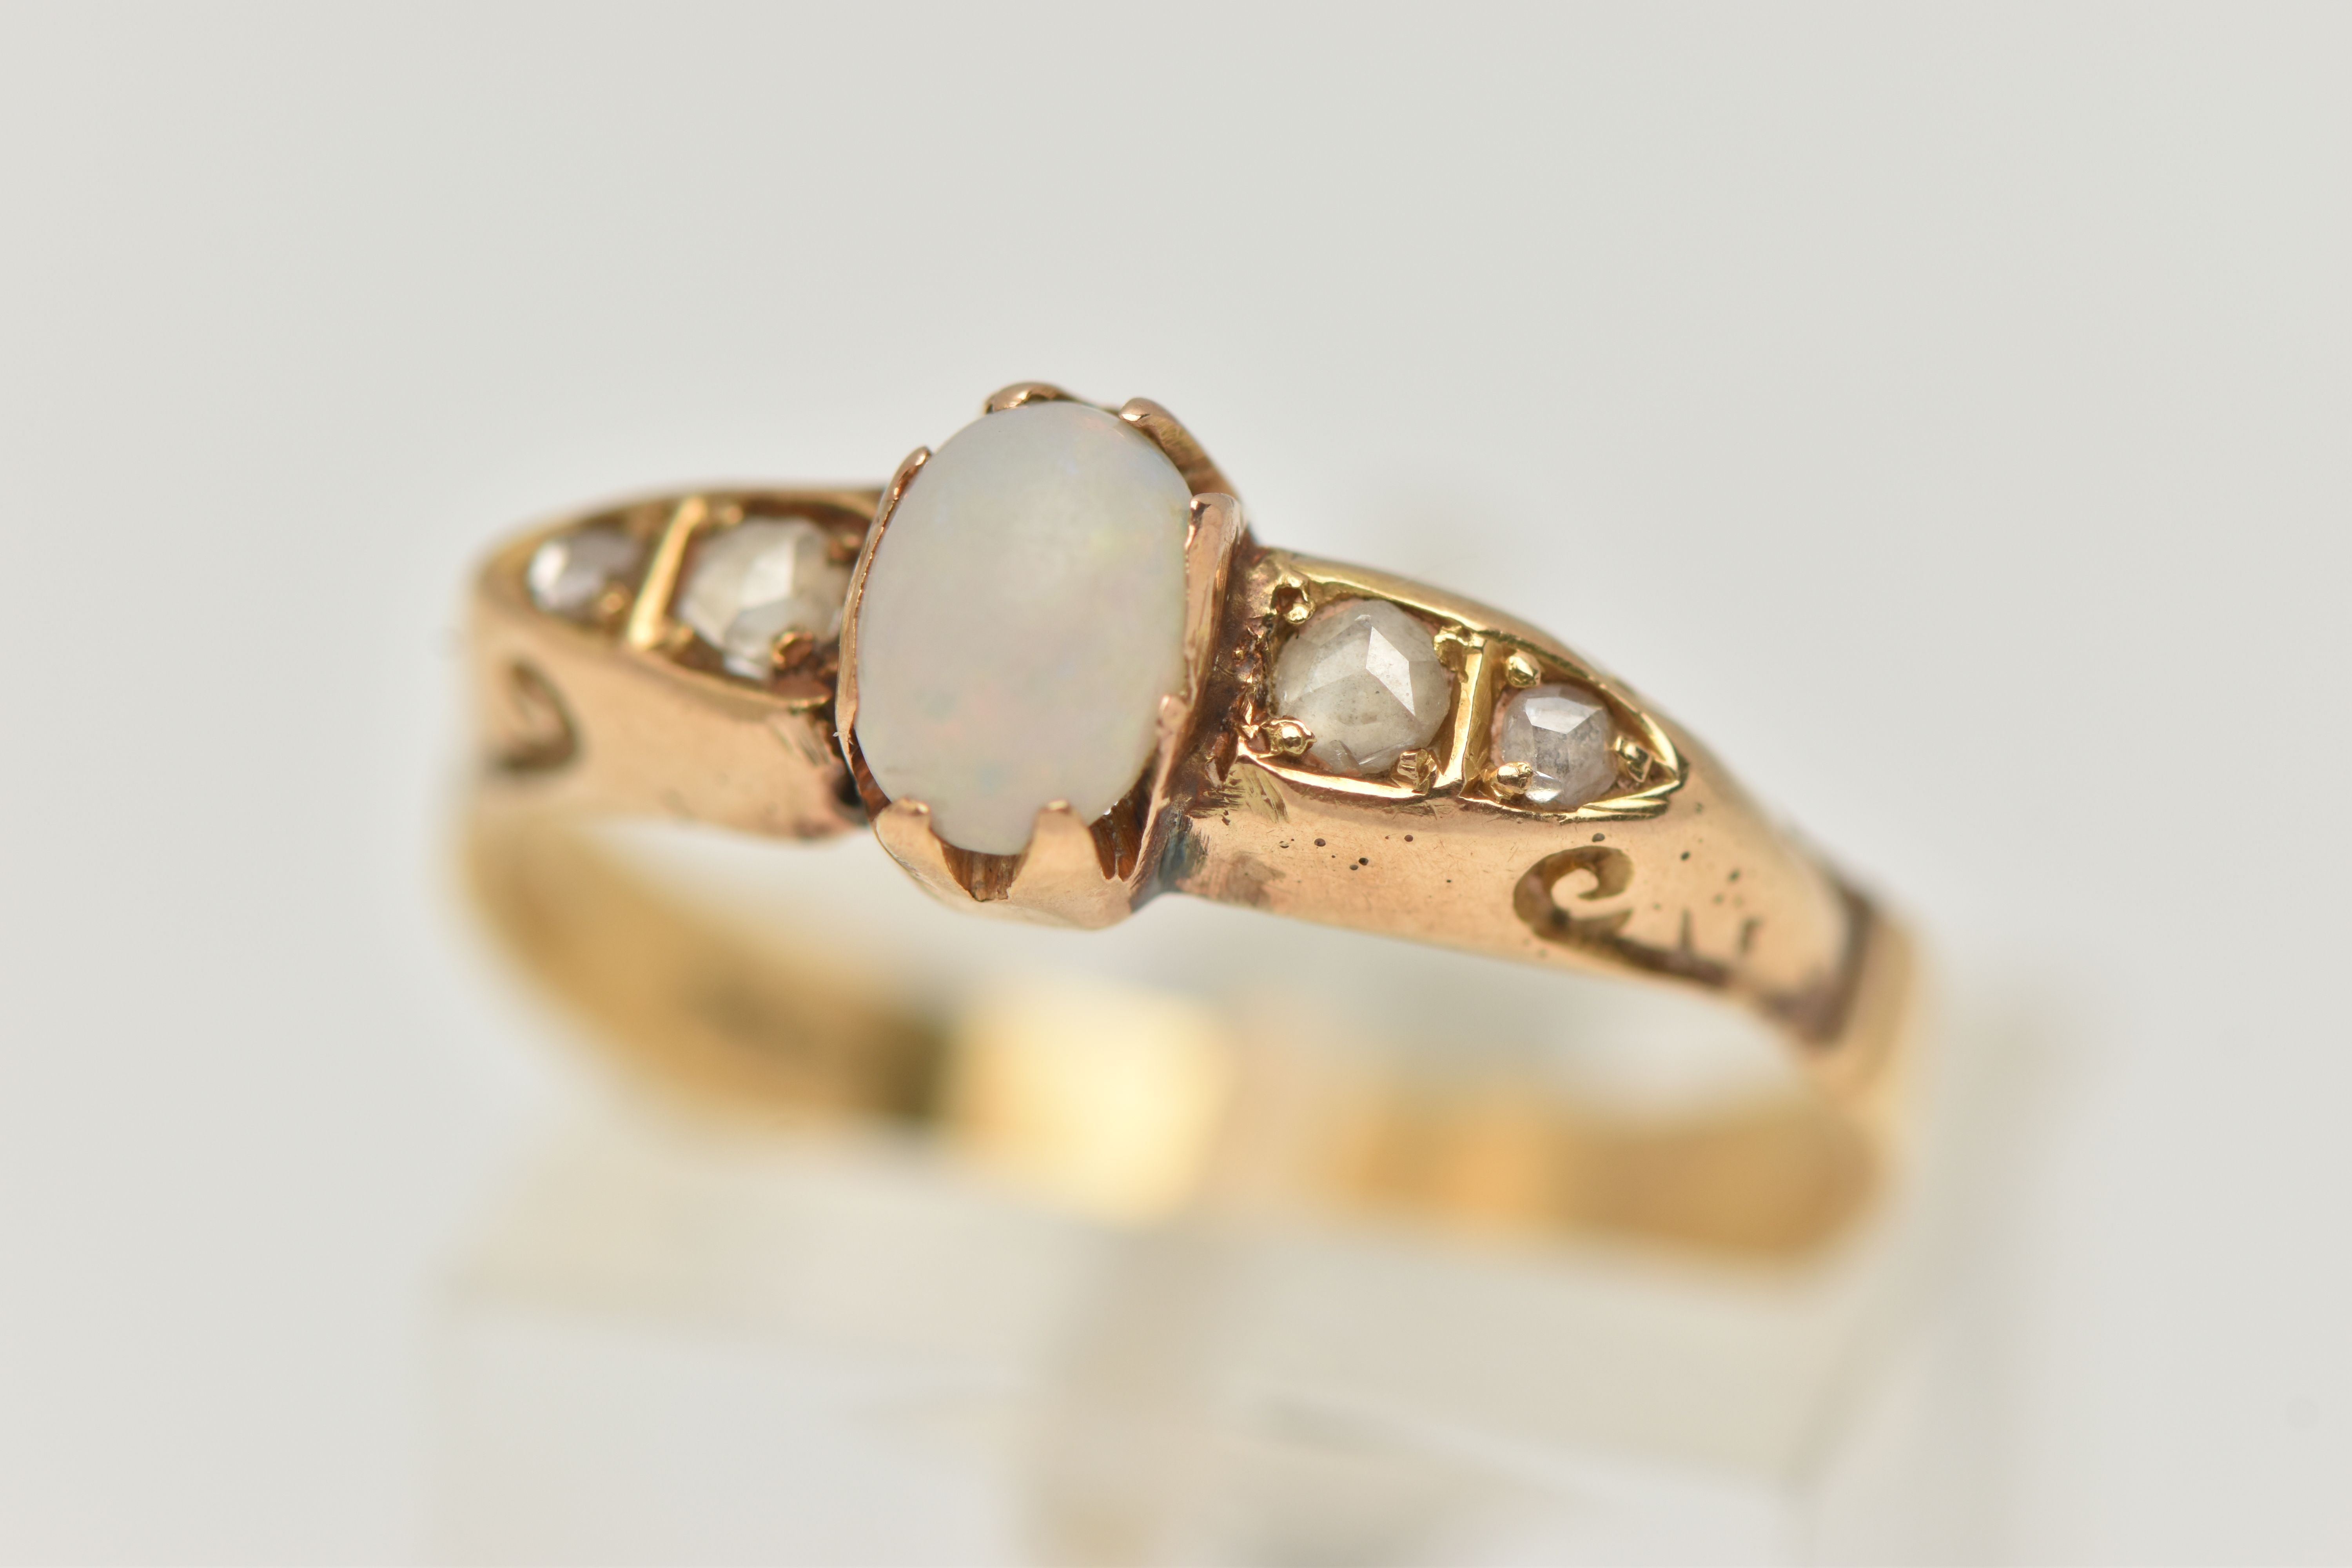 A YELLOW METAL OPAL AND DIAMOND RING, set with a central oval cut opal cabochon (abraded), measuring